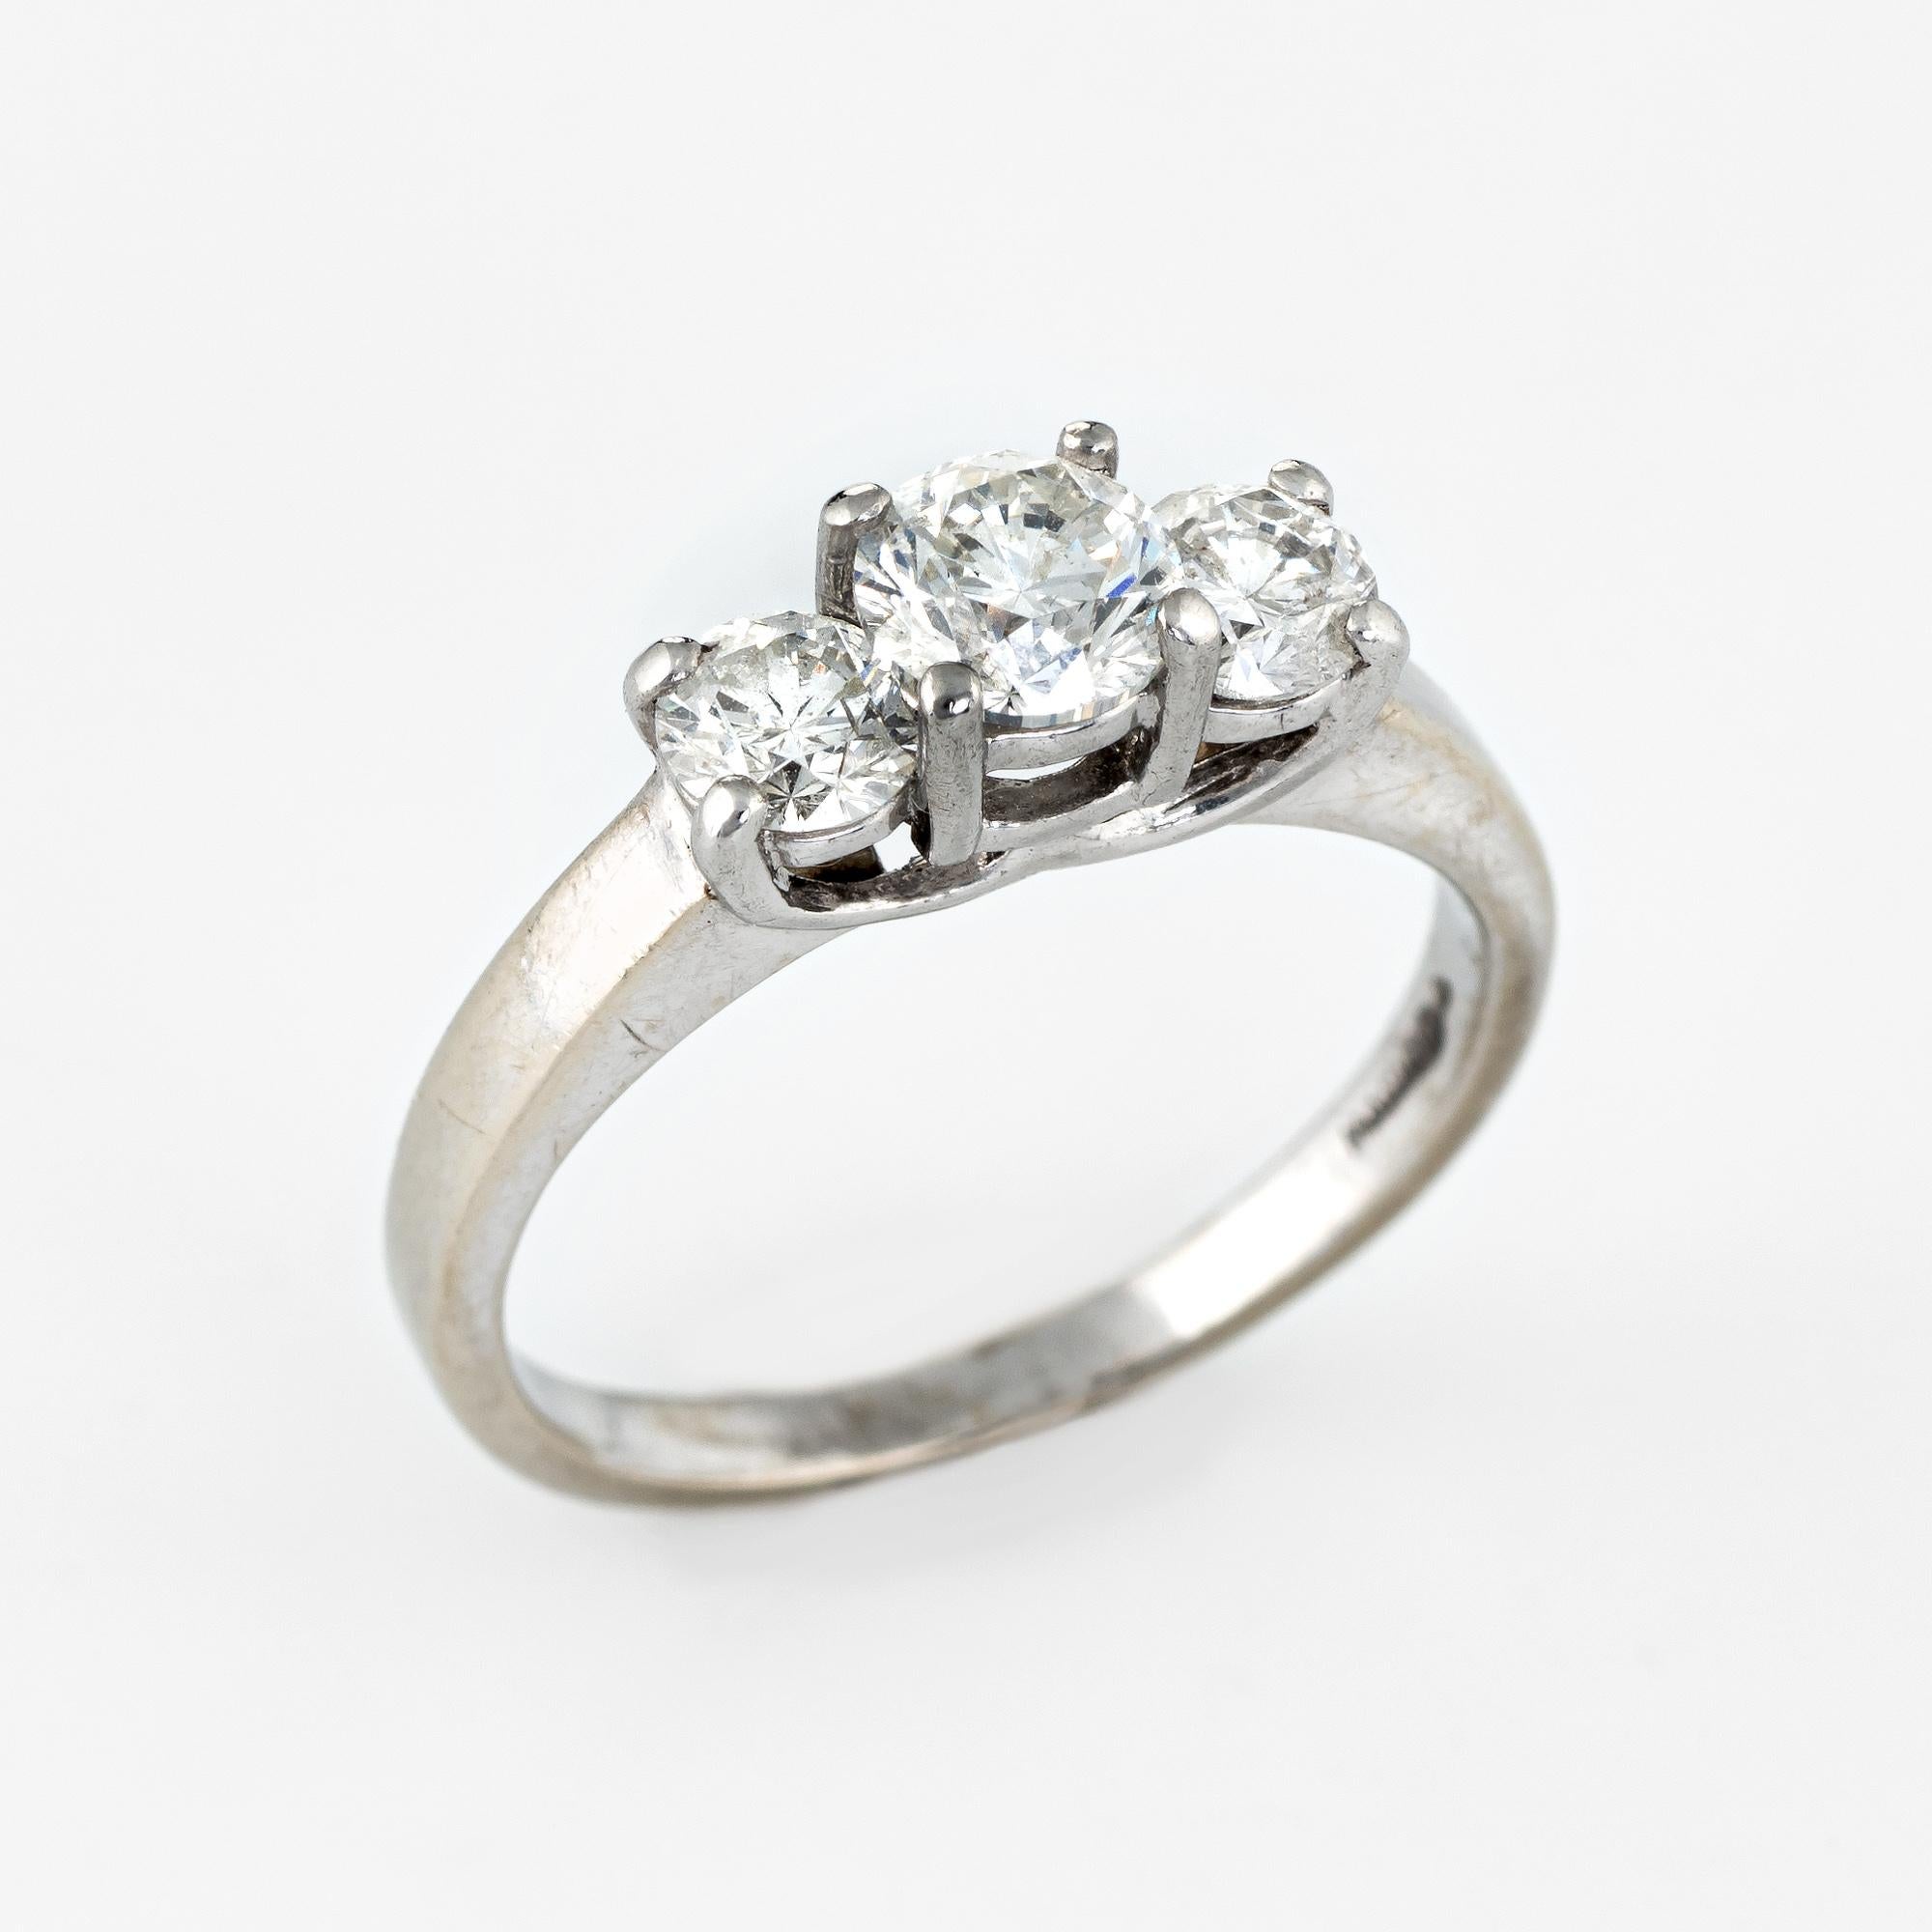 Stylish estate three diamond 'trilogy' ring crafted in 14 karat white gold and 900 platinum. 

Three round brilliant cut diamonds are set into the mount. The center diamond is estimated at 0.50 carats with the two side diamonds estimated at 0.25